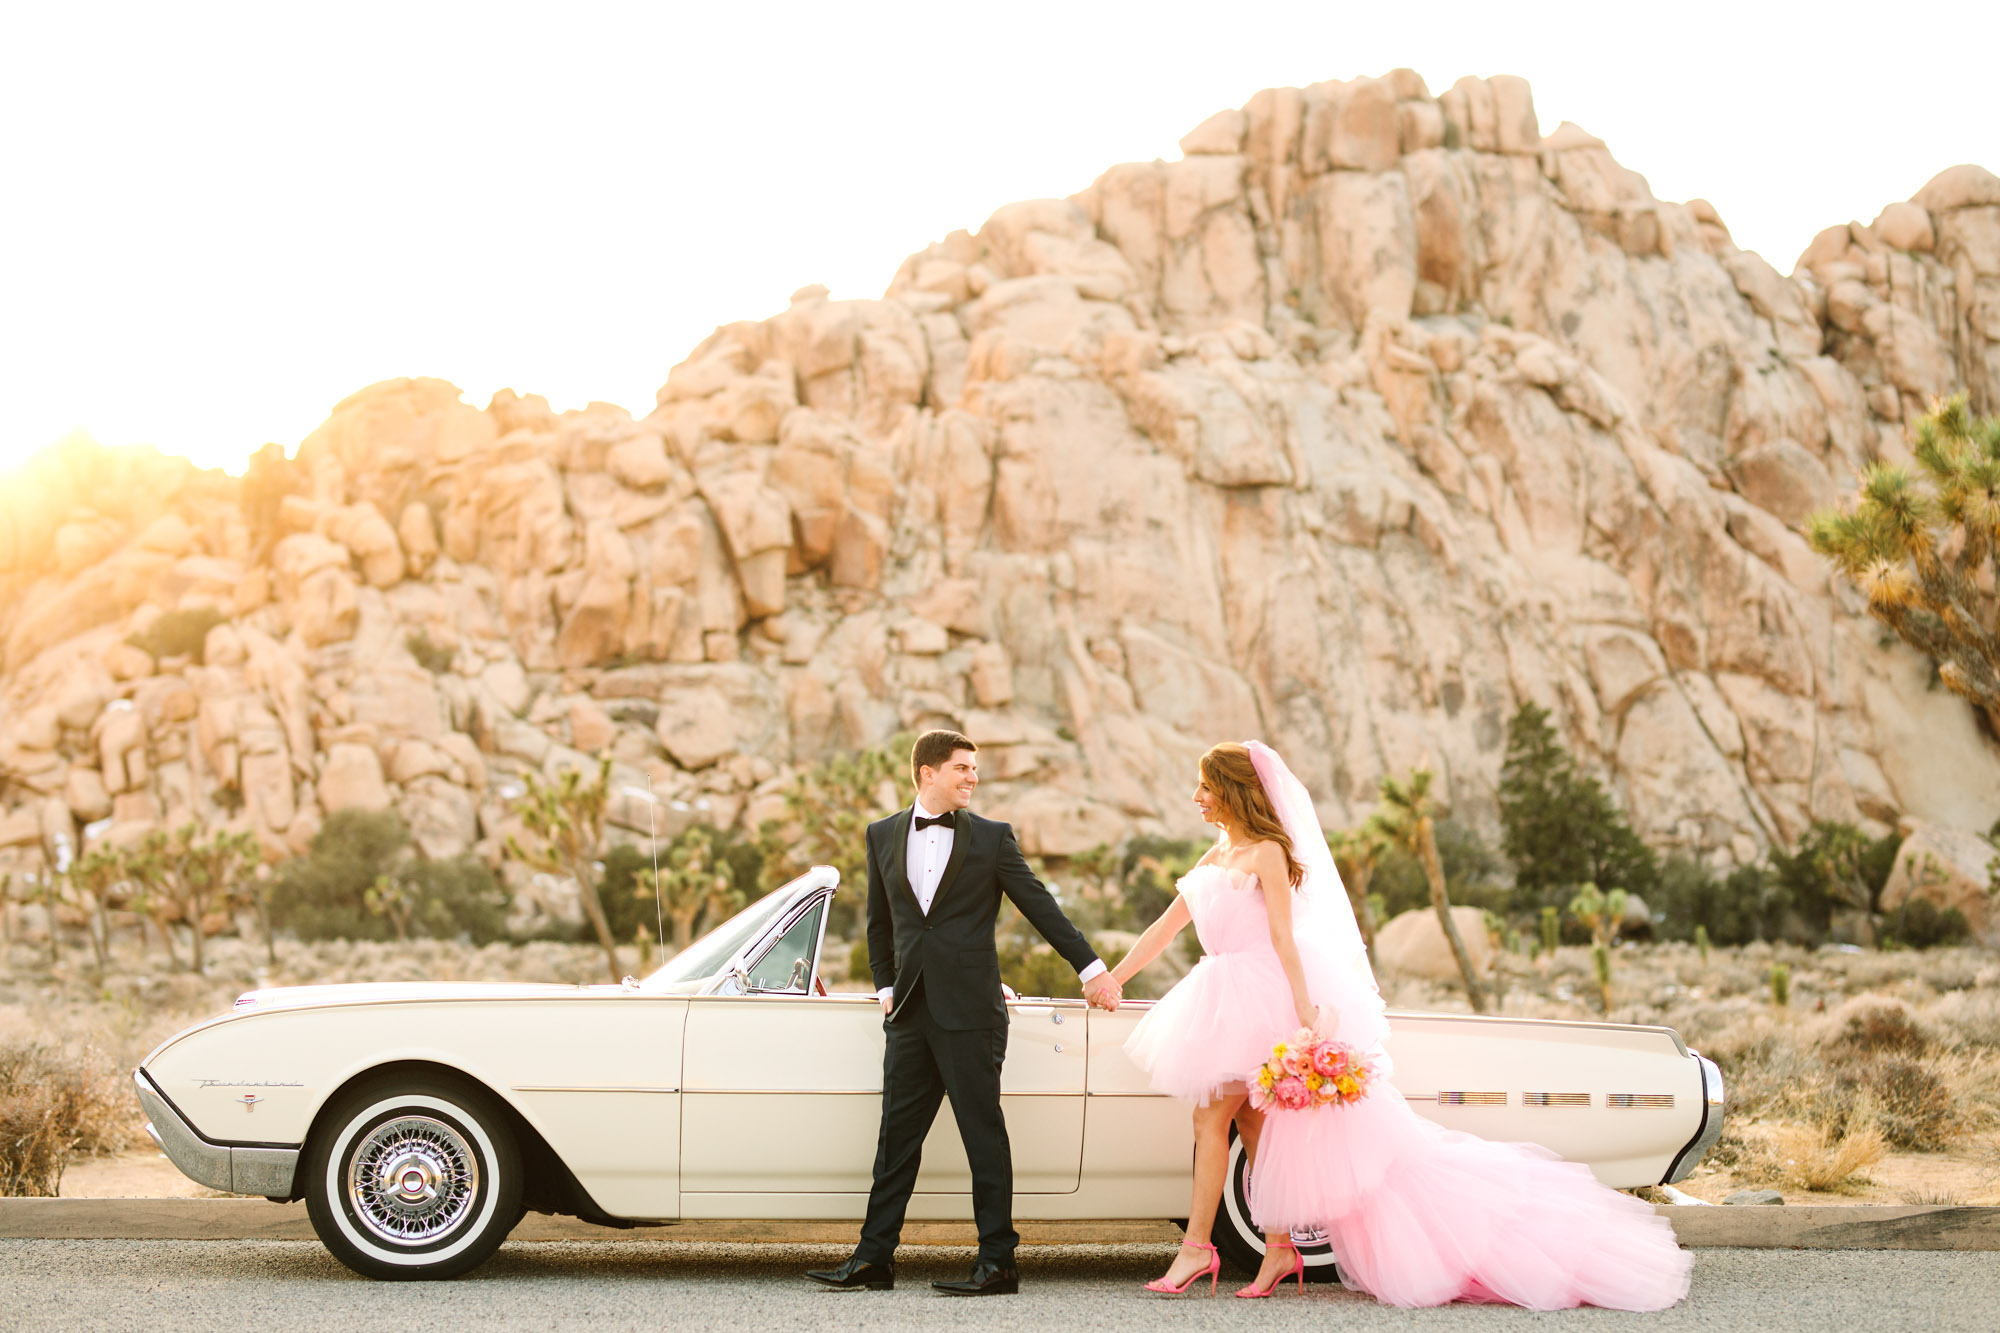 Bride and groom walking with white classic Ford Thunderbird convertible | Pink wedding dress Joshua Tree elopement featured on Green Wedding Shoes | Colorful desert wedding inspiration for fun-loving couples in Southern California #joshuatreewedding #joshuatreeelopement #pinkwedding #greenweddingshoes Source: Mary Costa Photography | Los Angeles